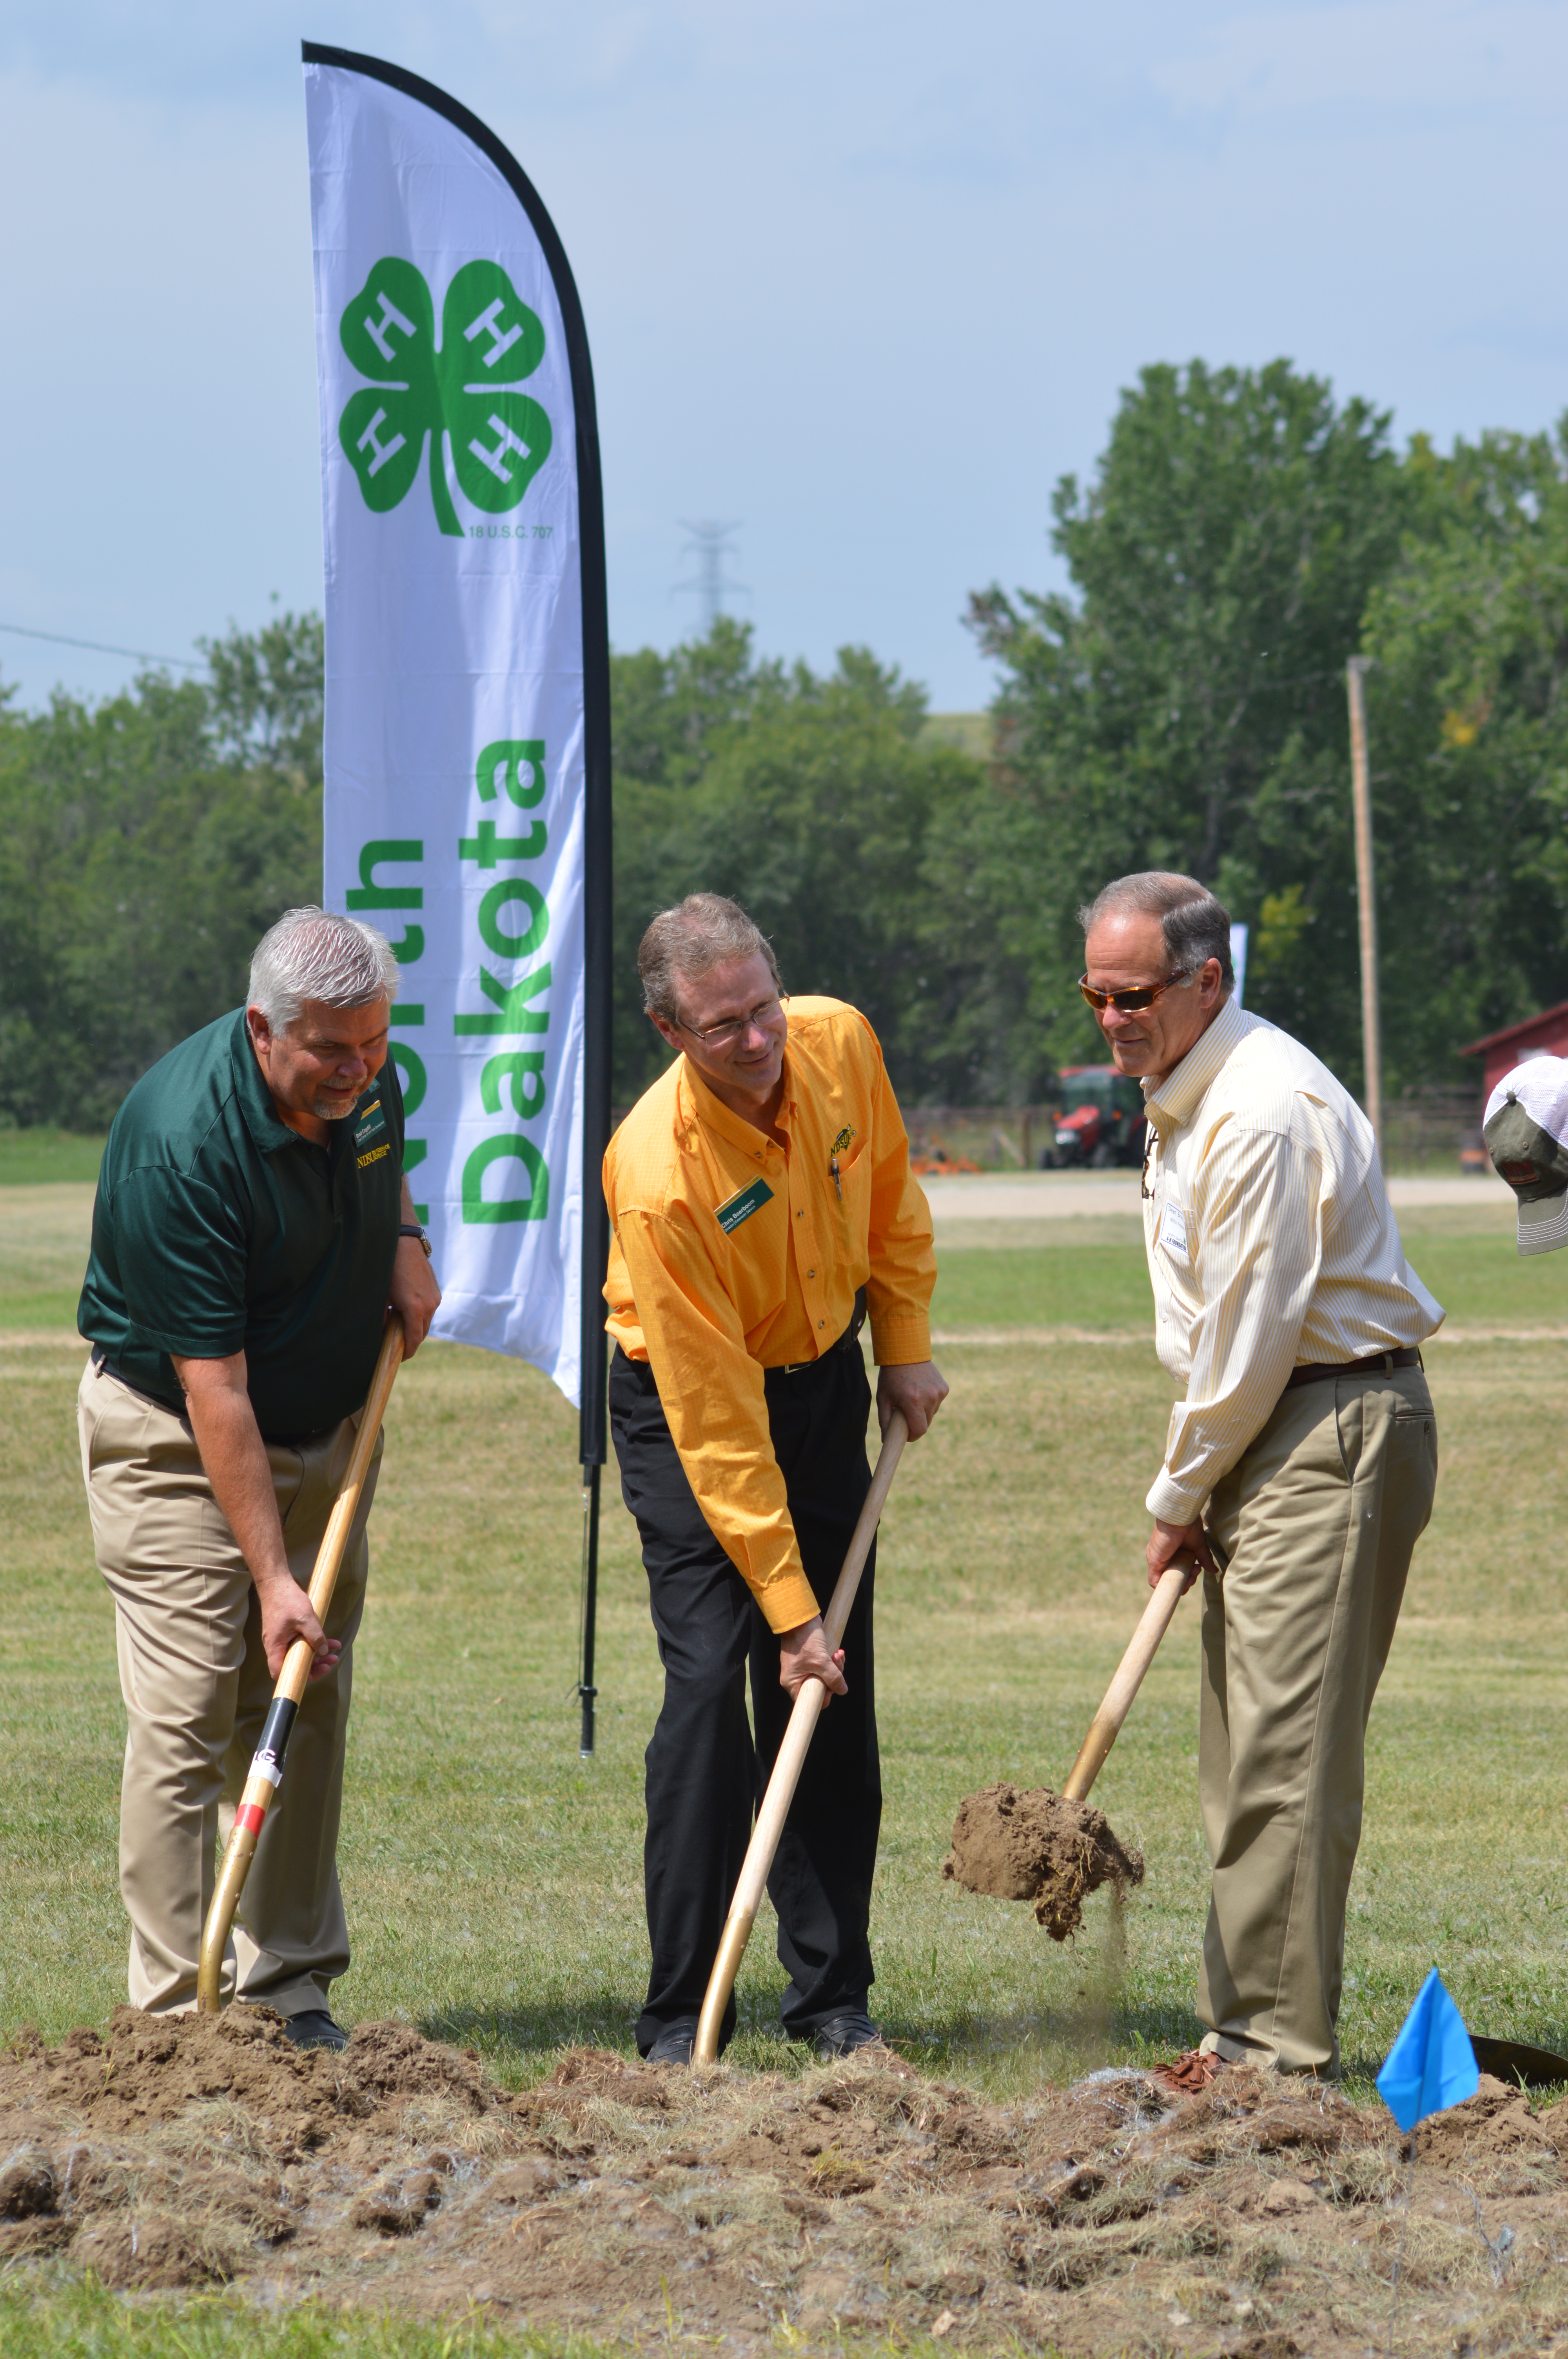 NDSU Extension Service Center for 4-H Youth Development Chair Brad Cogdill (left), NDSU Extension Service Director Chris Boerboom and NDSU President Dean Bresciani help break ground for a multipurpose facility at the North Dakota 4-H Camp near Washburn. The facility is part of a $2.3 million renovation project at the 47-year-old camp. (NDSU photo)